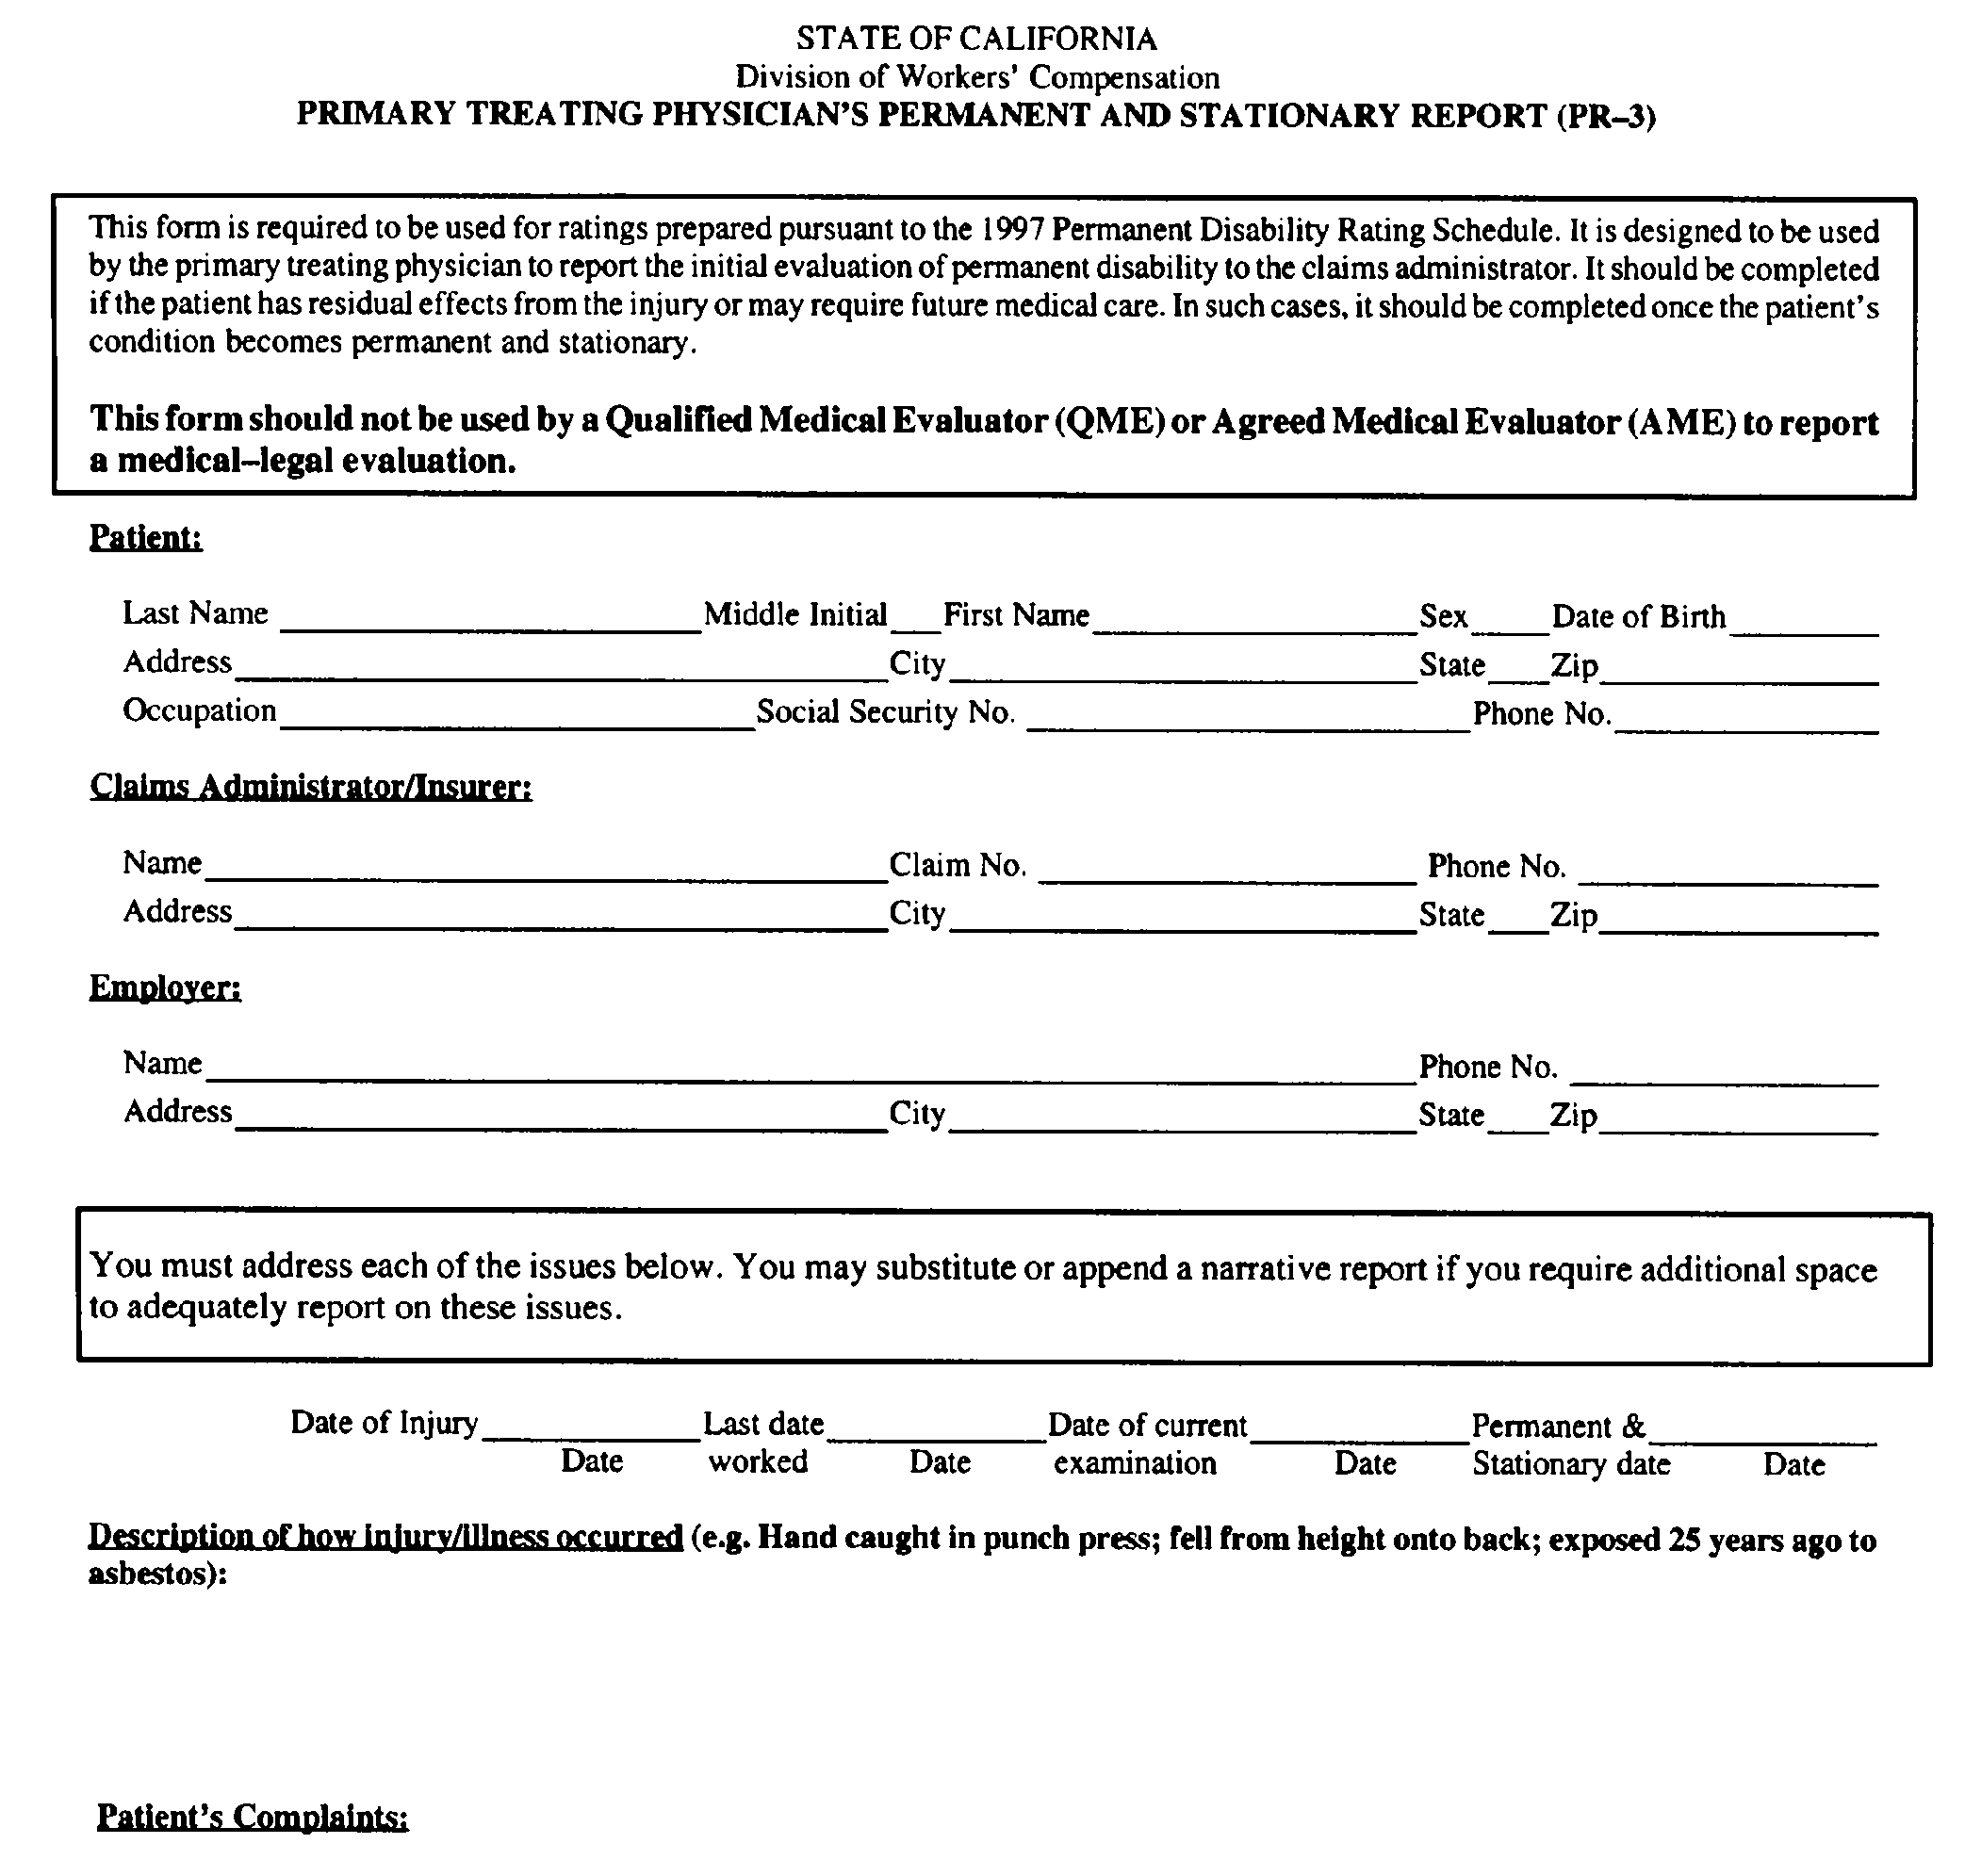 Image 1 within § 9785.3. Form PR-3 “Primary Treating Physician's Permanent and Stationary Report.”